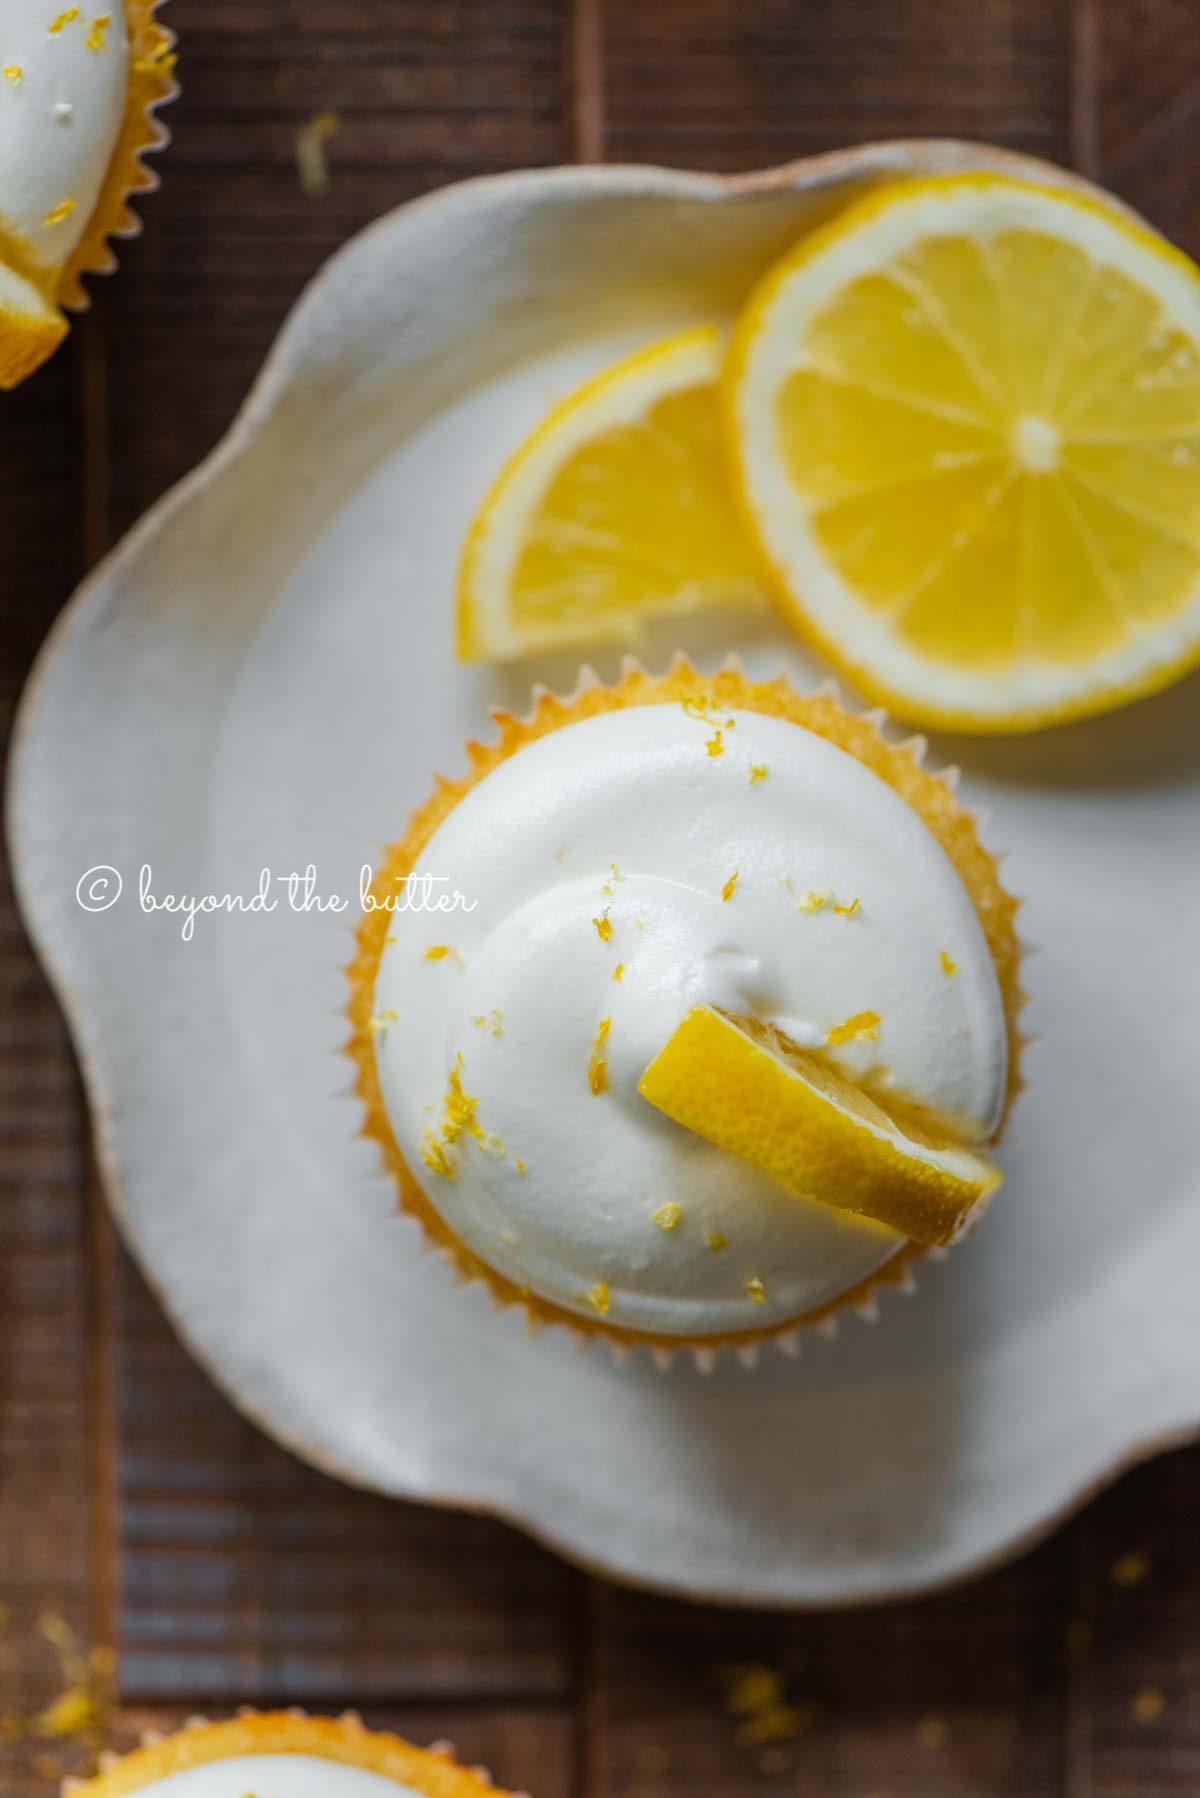 Lemon cupcake with lemon cream cheese frosting garnished with lemons on a small wavy dessert plate | All Images © Beyond the Butter®